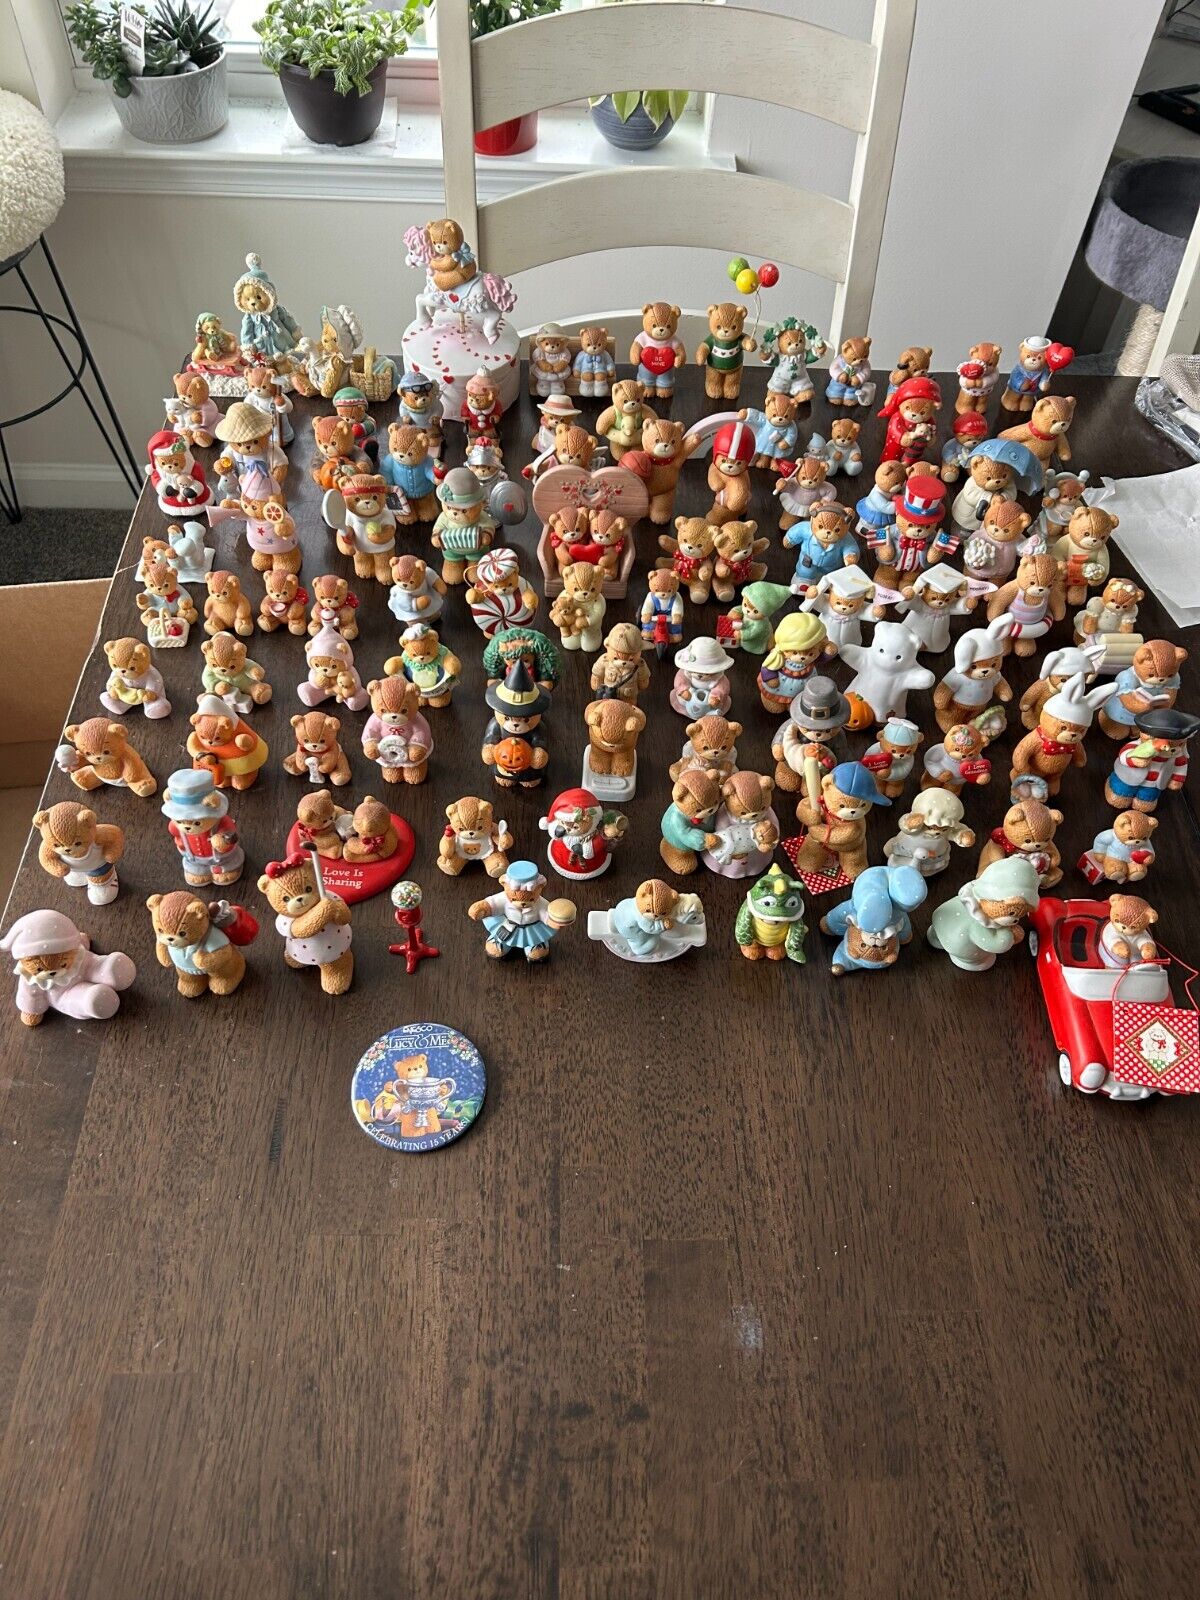 Pristine Vintage Lucy and Me Bear Figurines (Over 100 Figures)